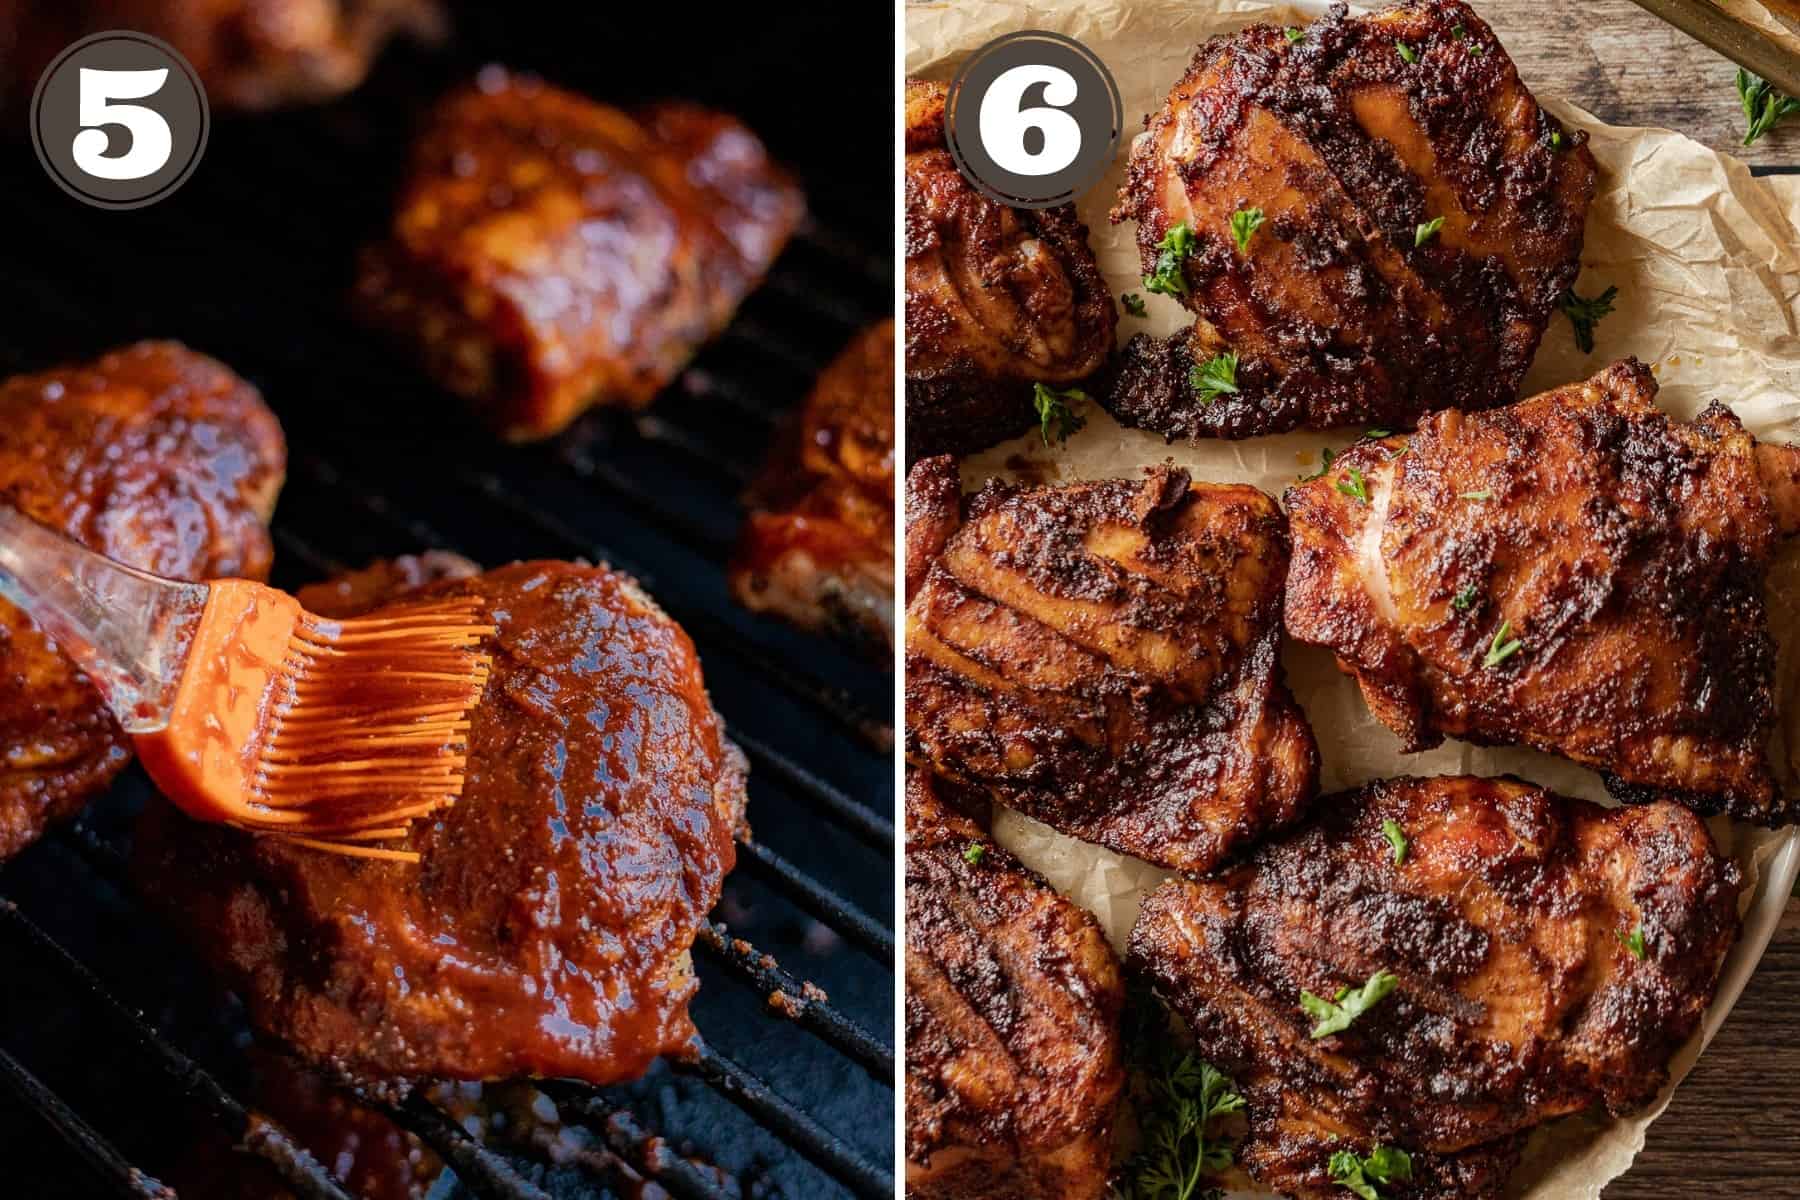 Side by side photos showing chicken thighs on a grill being brushed with BBQ sauce and plated smoked chicken thighs.